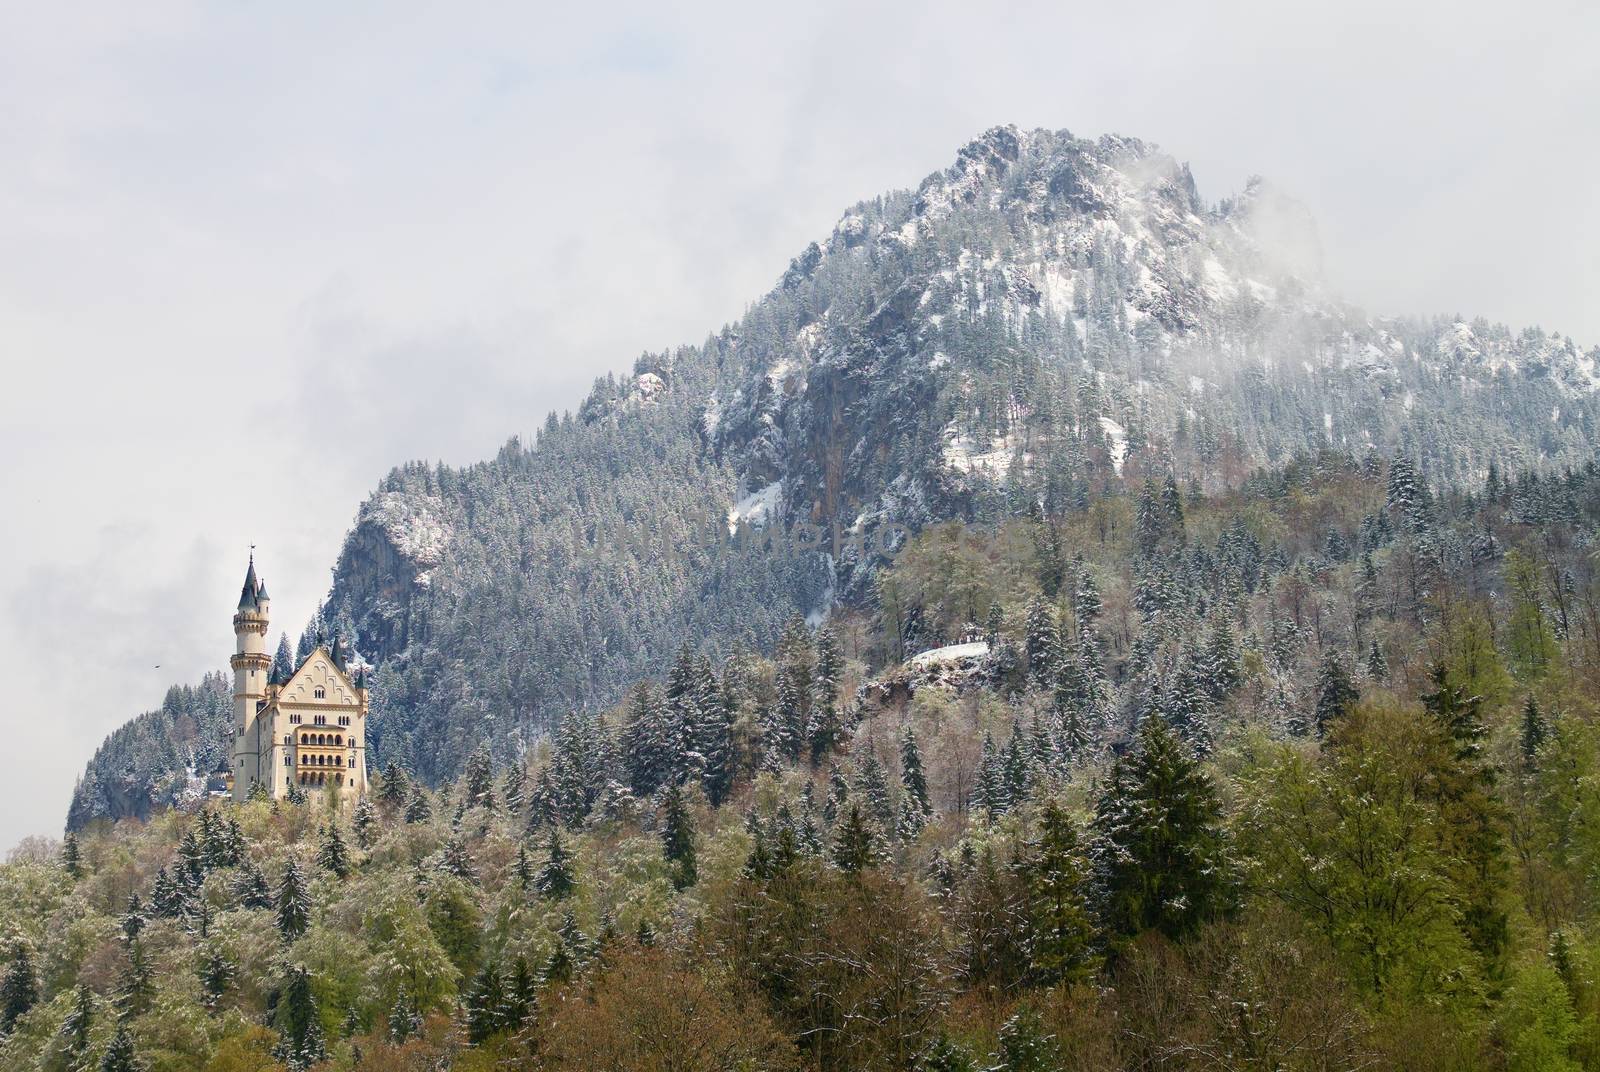 Old castle in mountais, rocks and forest covered with fresh snow and hoarfrost, winter with snow return in spring mountains.